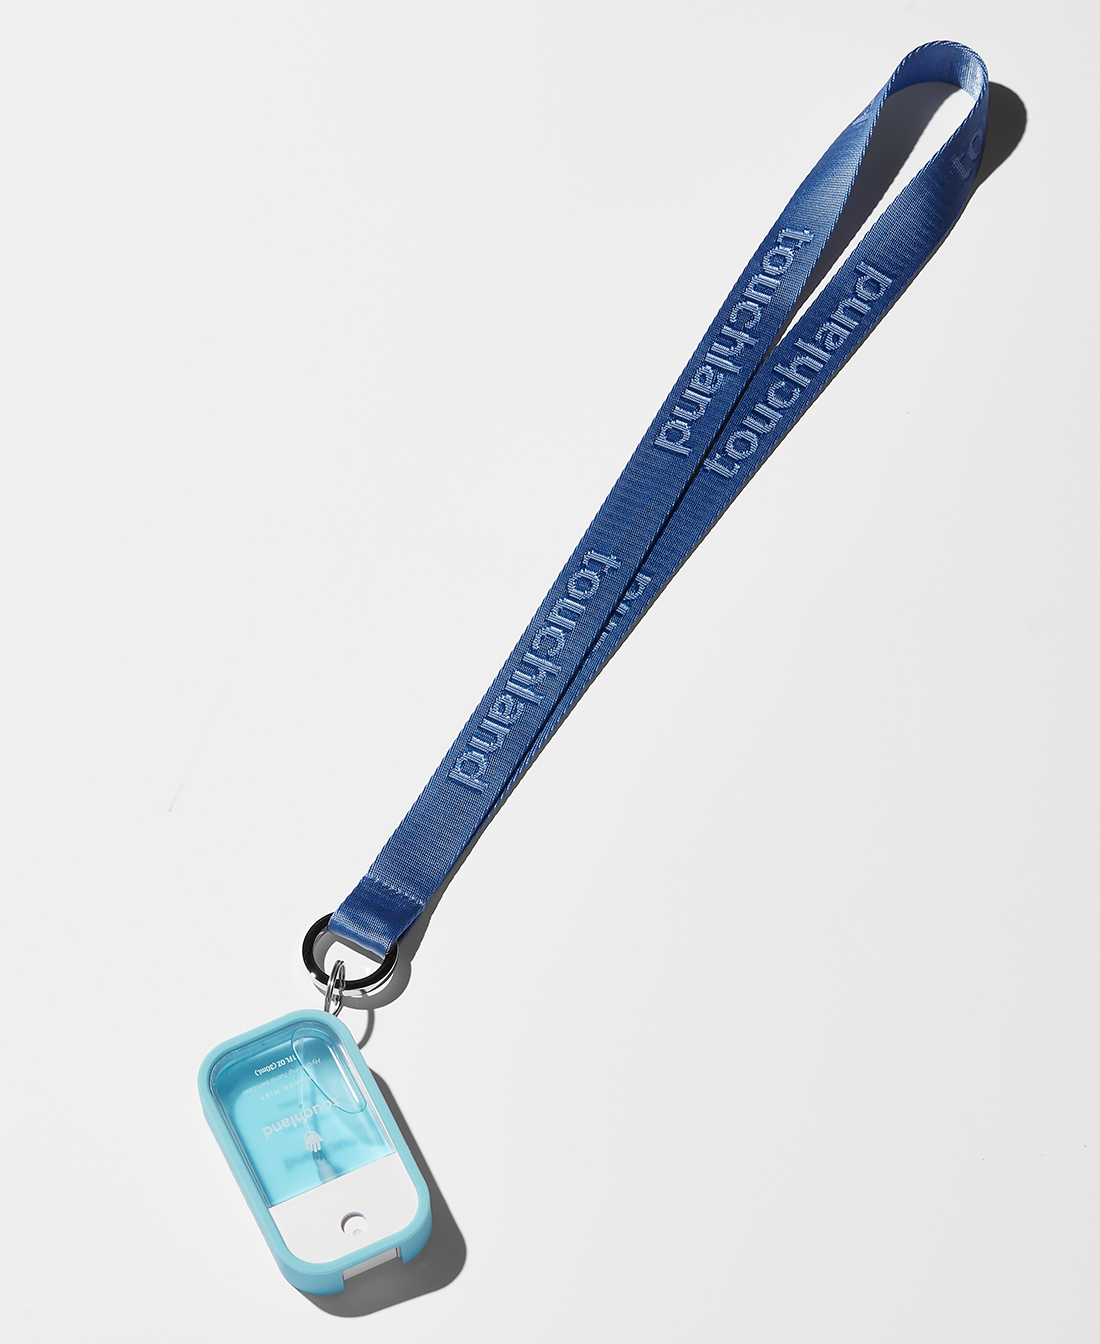 Touchland blue mist case attached to blue lanyard with blue power mist